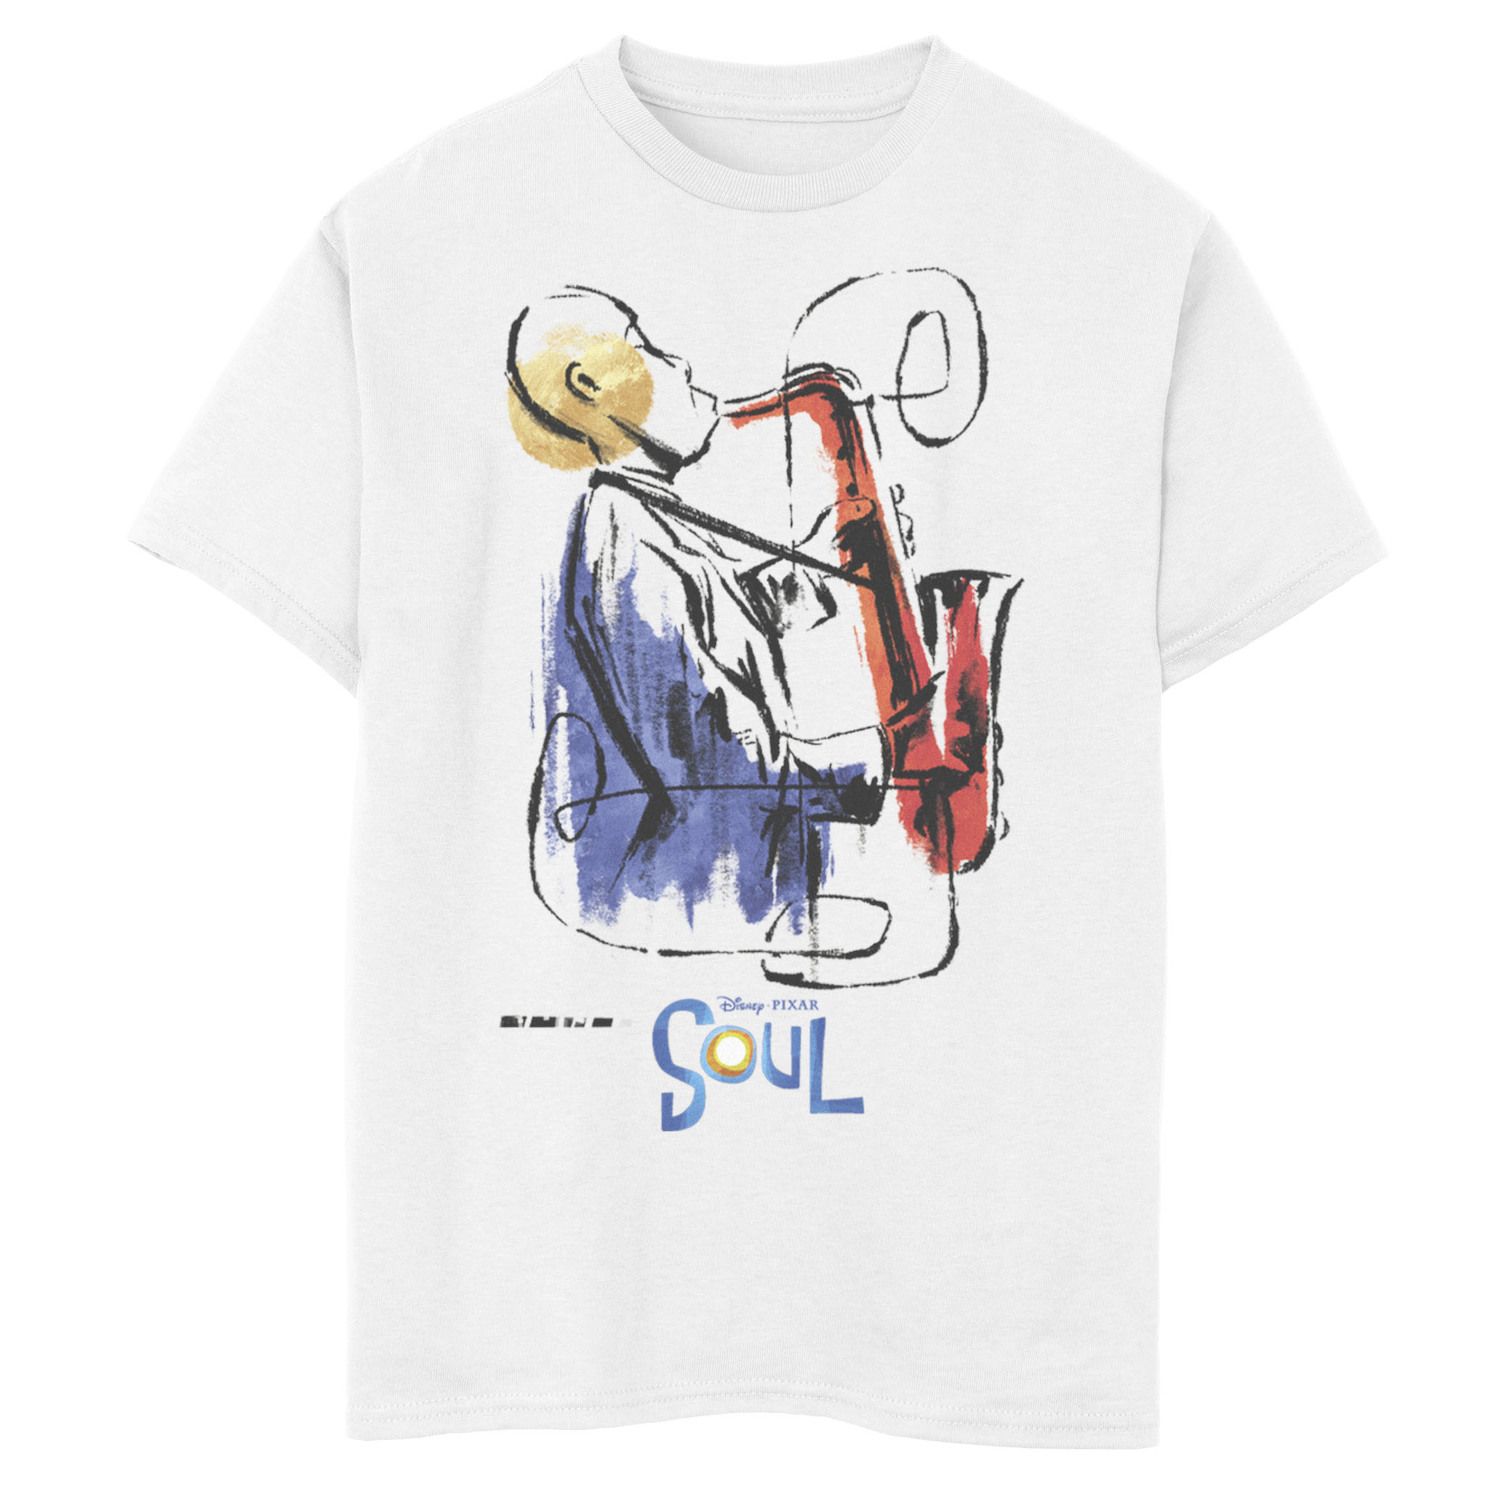 Image for Disney / Pixar 's Soul Boys 8-20 Saxophone Painting Graphic Tee at Kohl's.